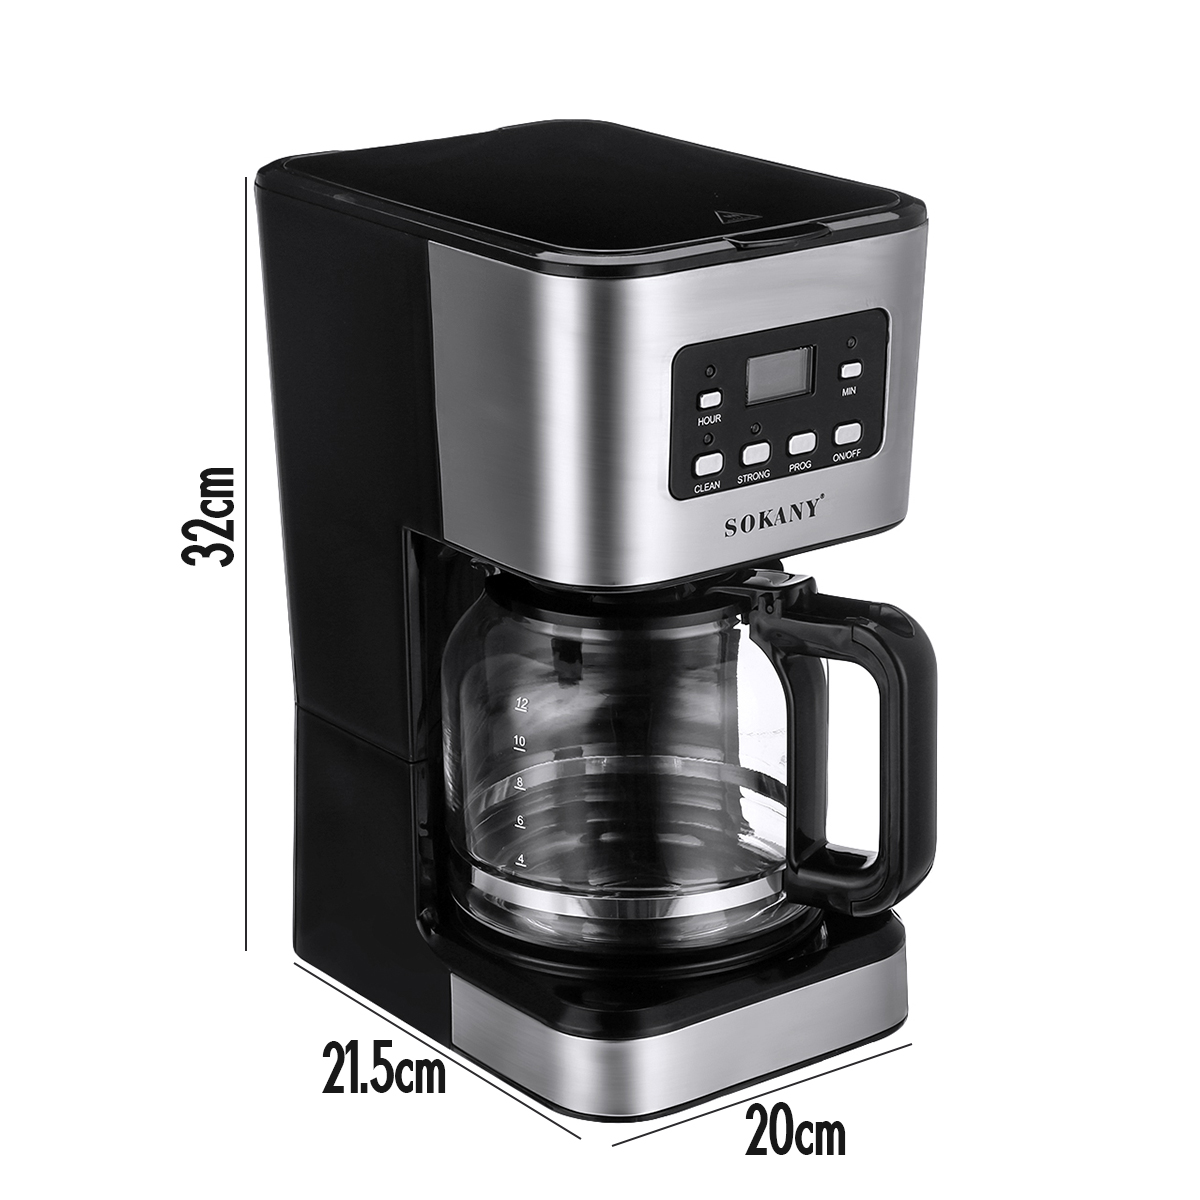 220V Coffee Maker 12 Cups 1.5L Semi-Automatic Espresso Making Machine Stainless Steel 17